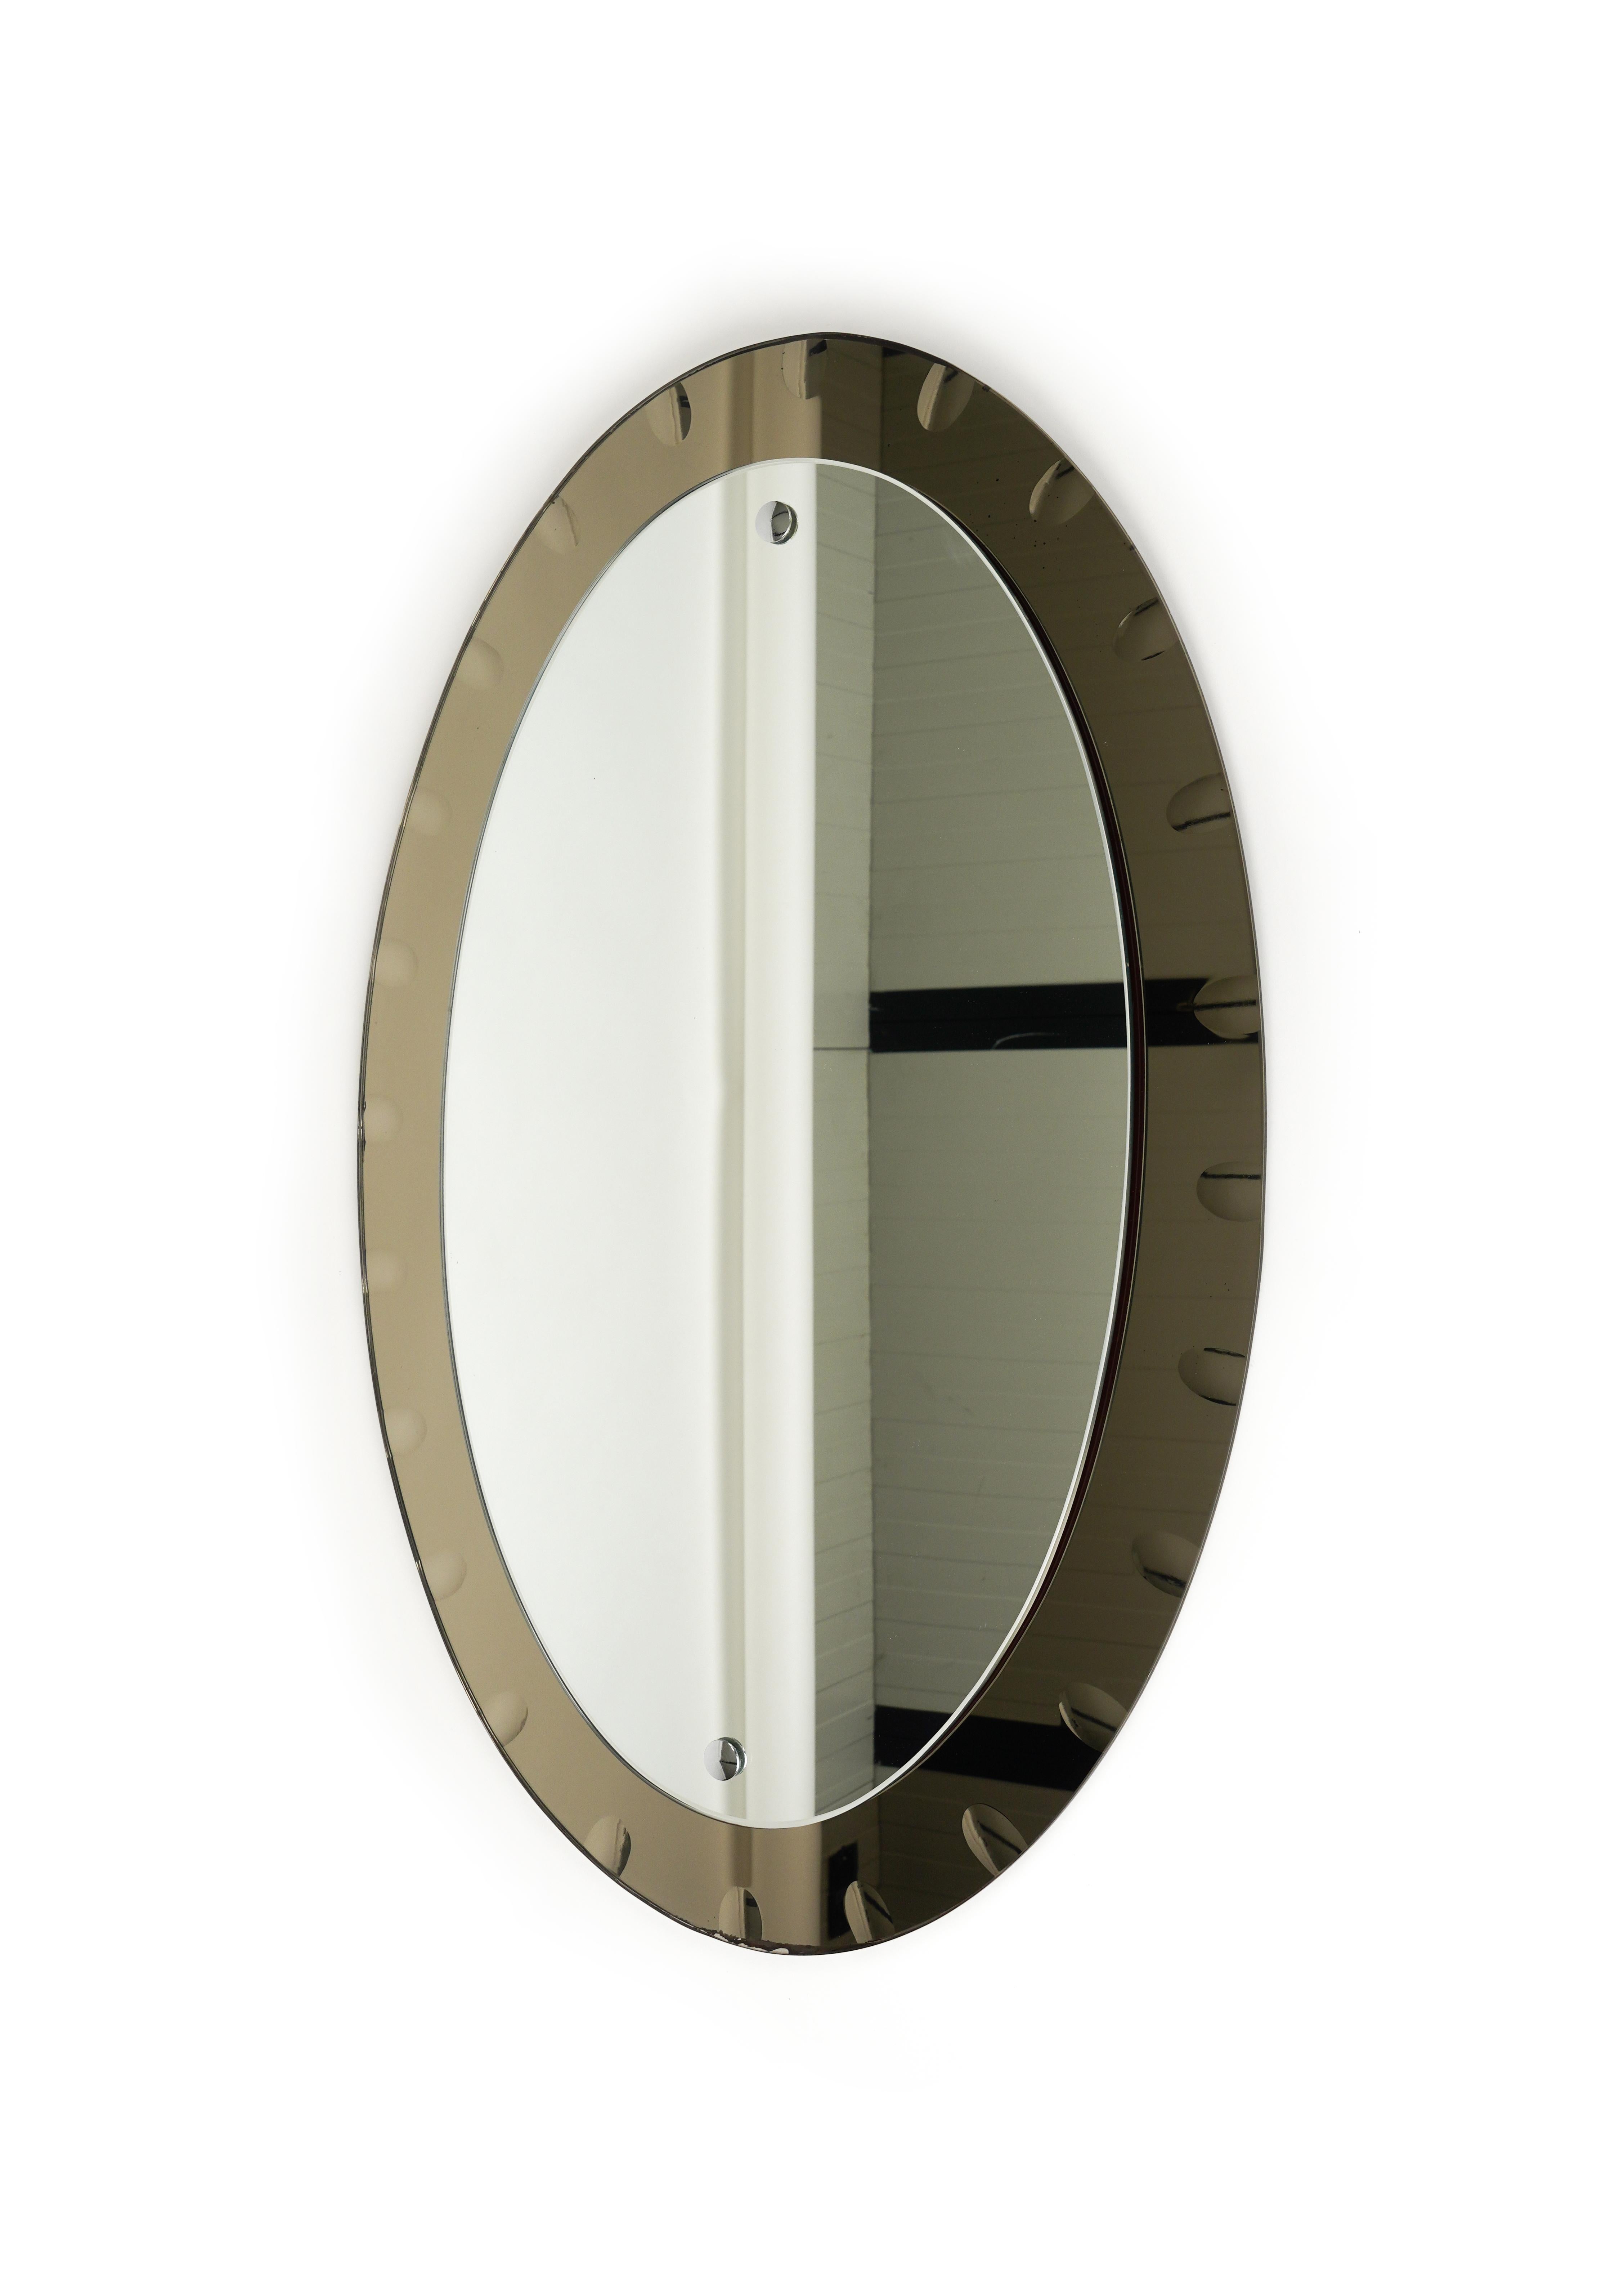 Midcentury Oval Wall Mirror with Bronzed Frame by Cristal Arte, Italy 1960s For Sale 1